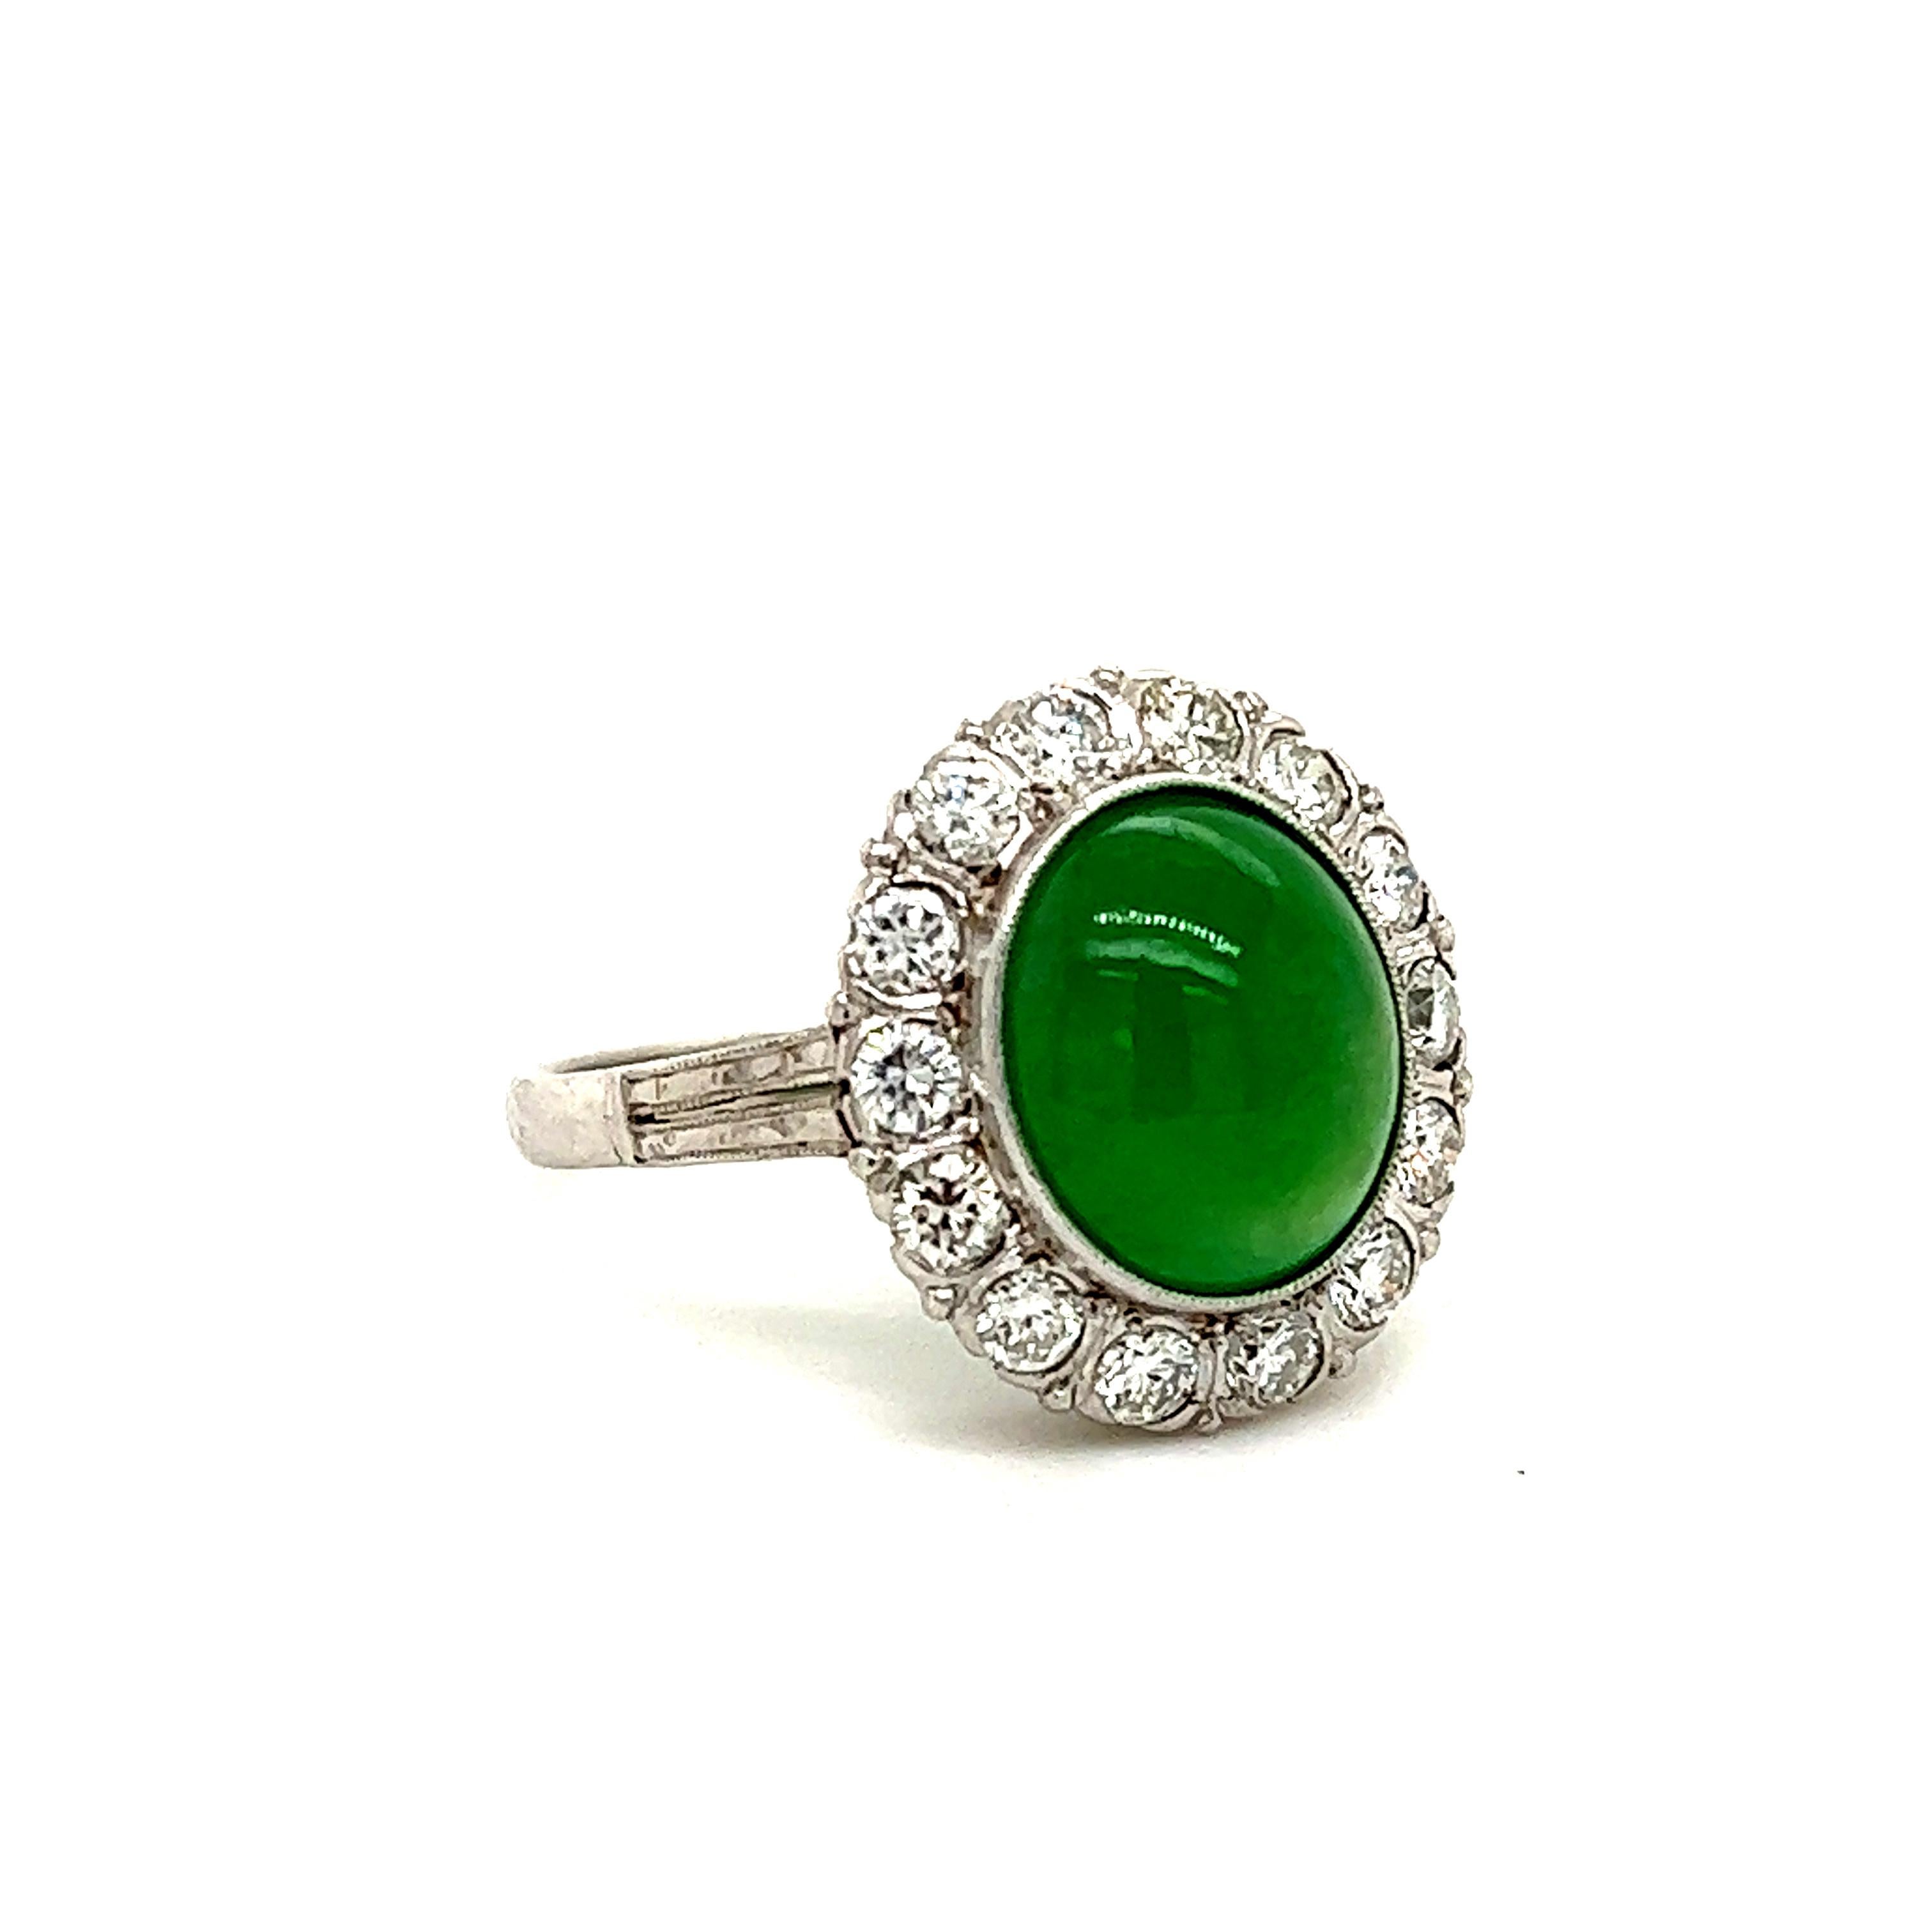 Fantastic design seen on this art deco treasure! This gorgeous ring is crafted in platinum and showcases one cabochon cut jade gemstone. The gemstone displays a vibrant green color that pops off the platinum design. The jade gemstone is bezel set in